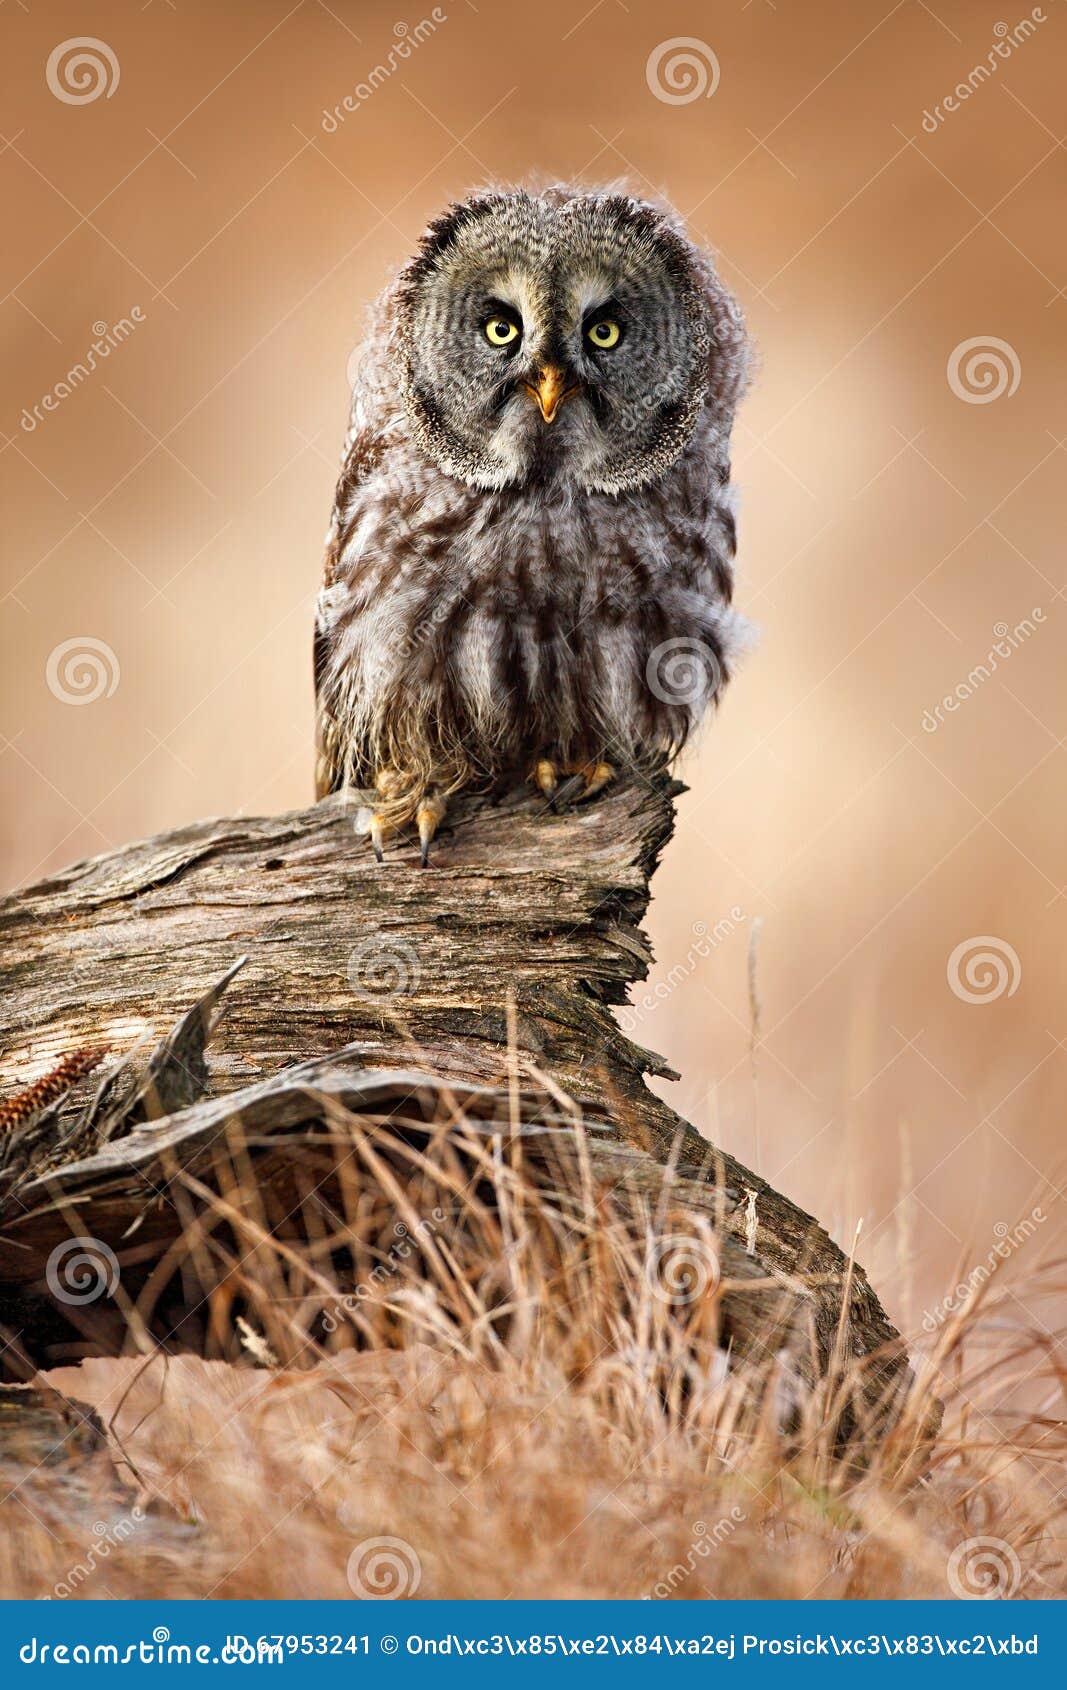 great grey owl, strix nebulosa, sitting on old tree trunk with grass, portrait with yellow eyes